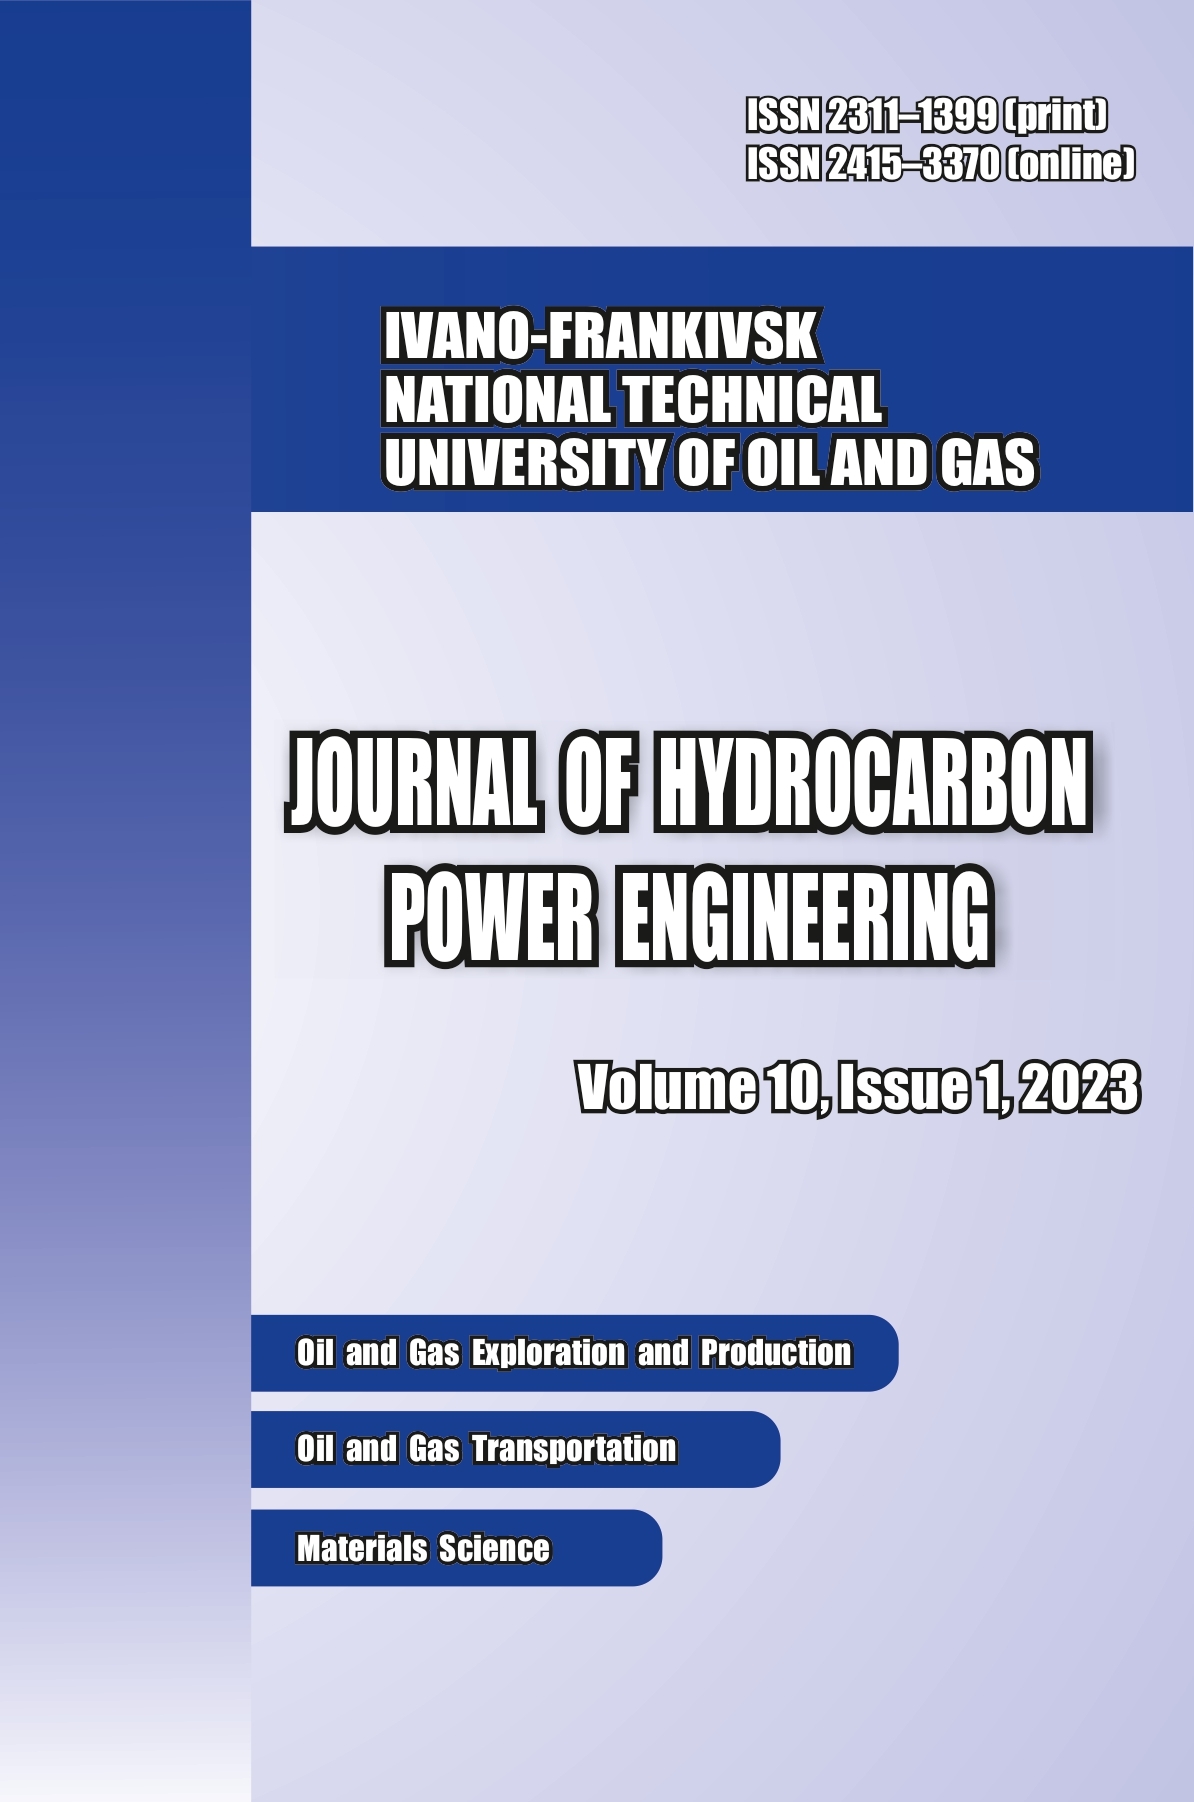 					View Vol. 10 No. 1 (2023): JOURNAL OF HYDROCARBON POWER ENGINEERING
				